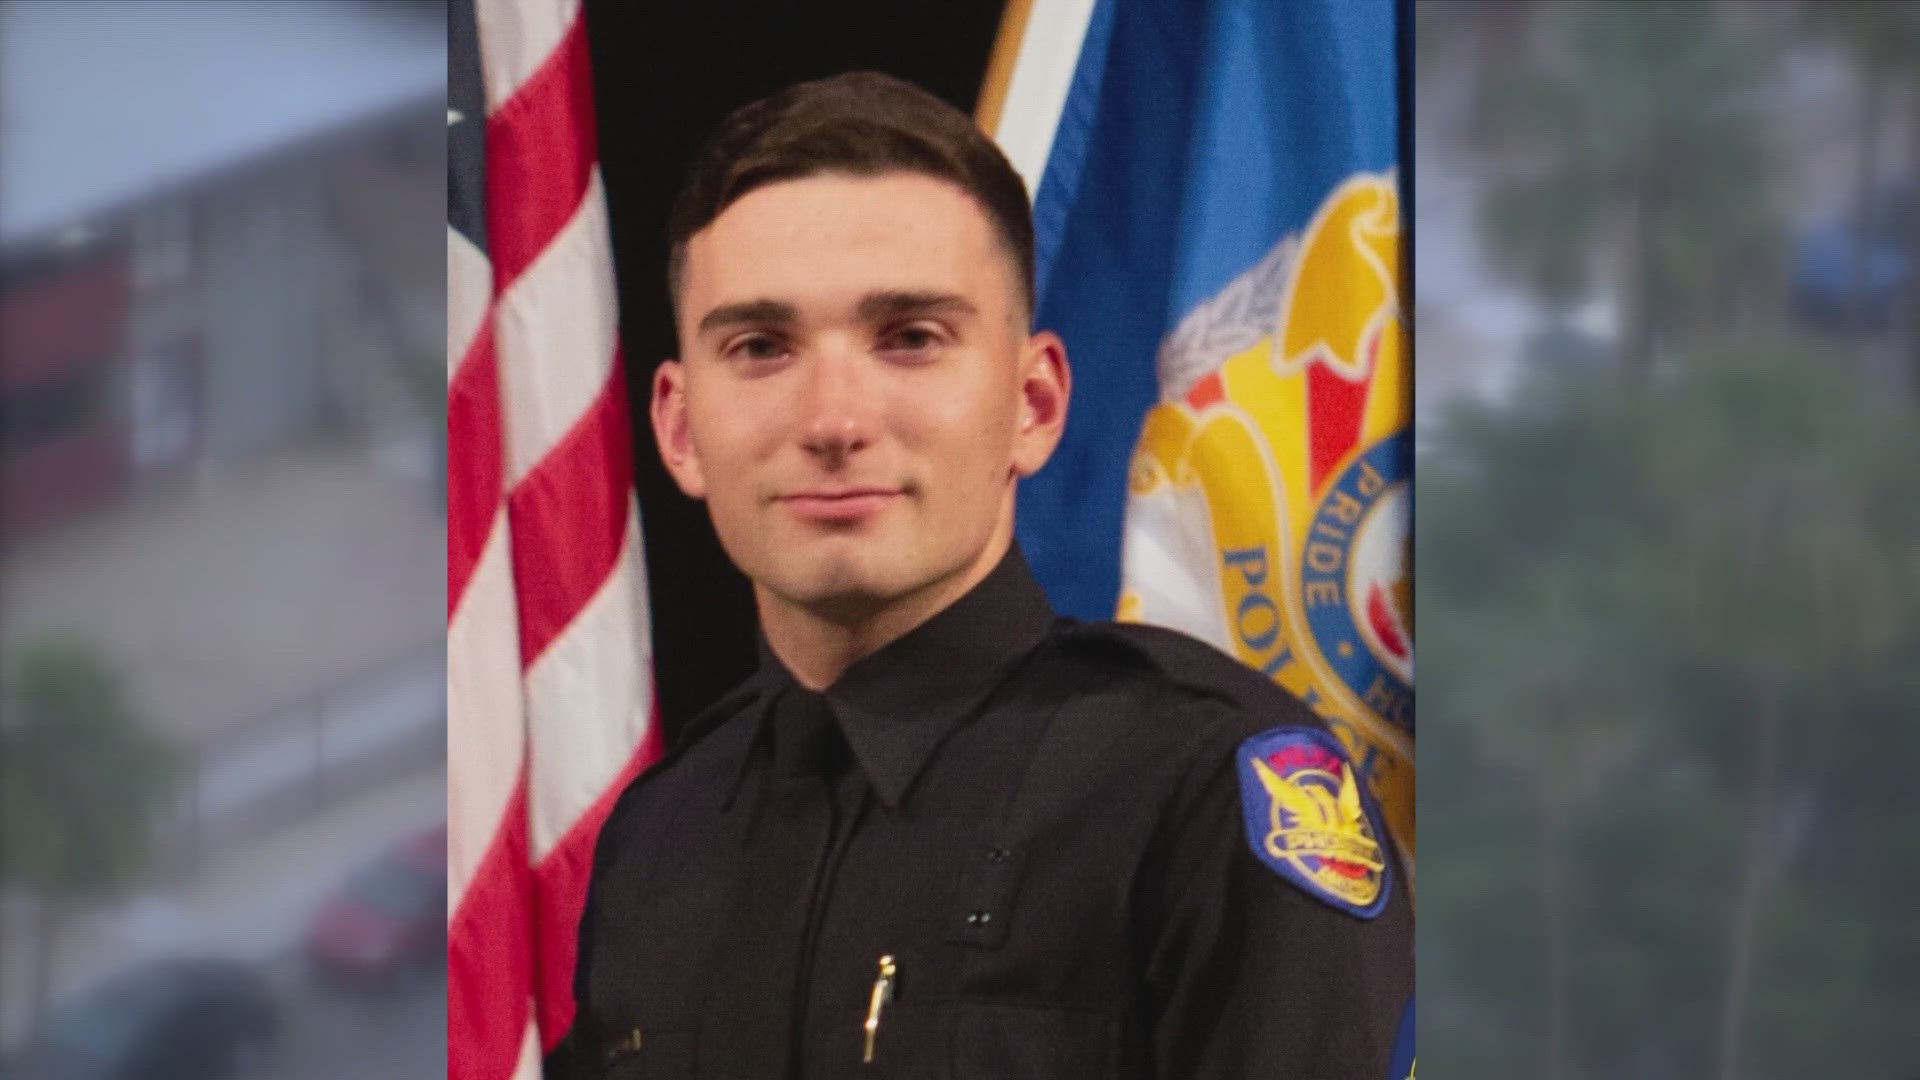 Officer Moldovan's former patrol partner shares new details about the shooting that nearly cost the young officer his life.